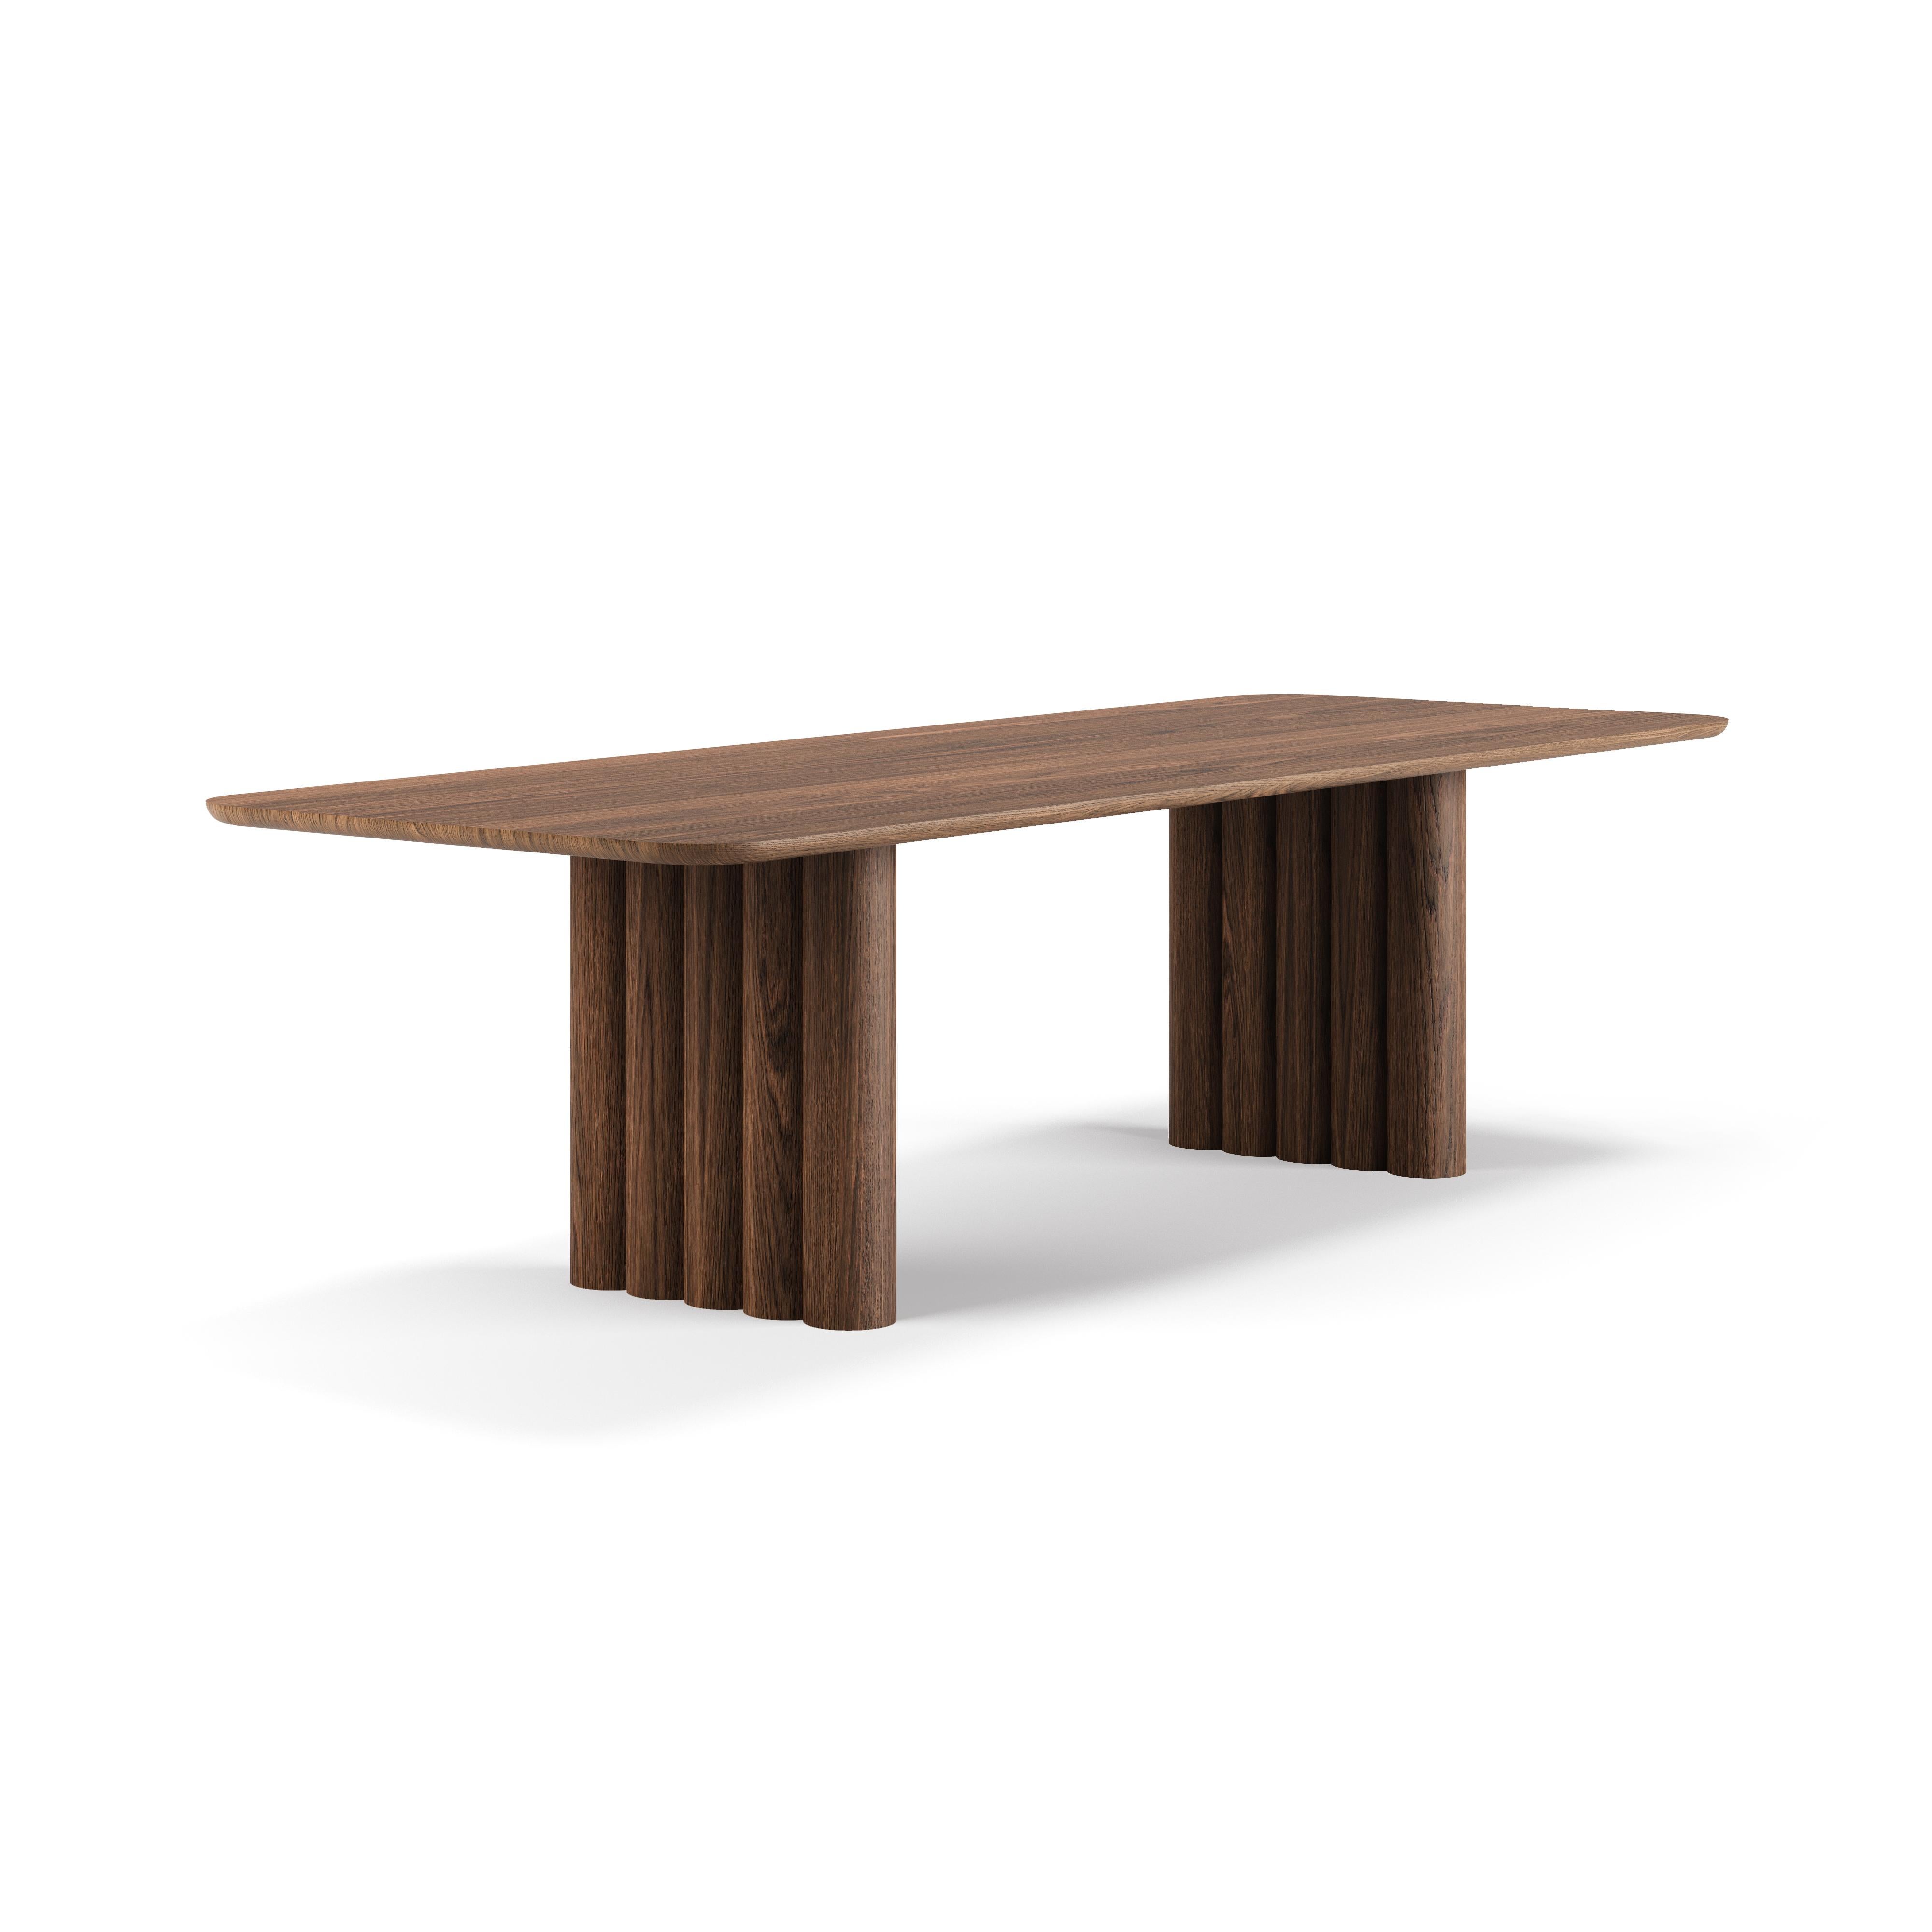 Danish Rectangular Dining Table 'Plush' by Dk3, Smoked Oak or Walnut, 200 For Sale